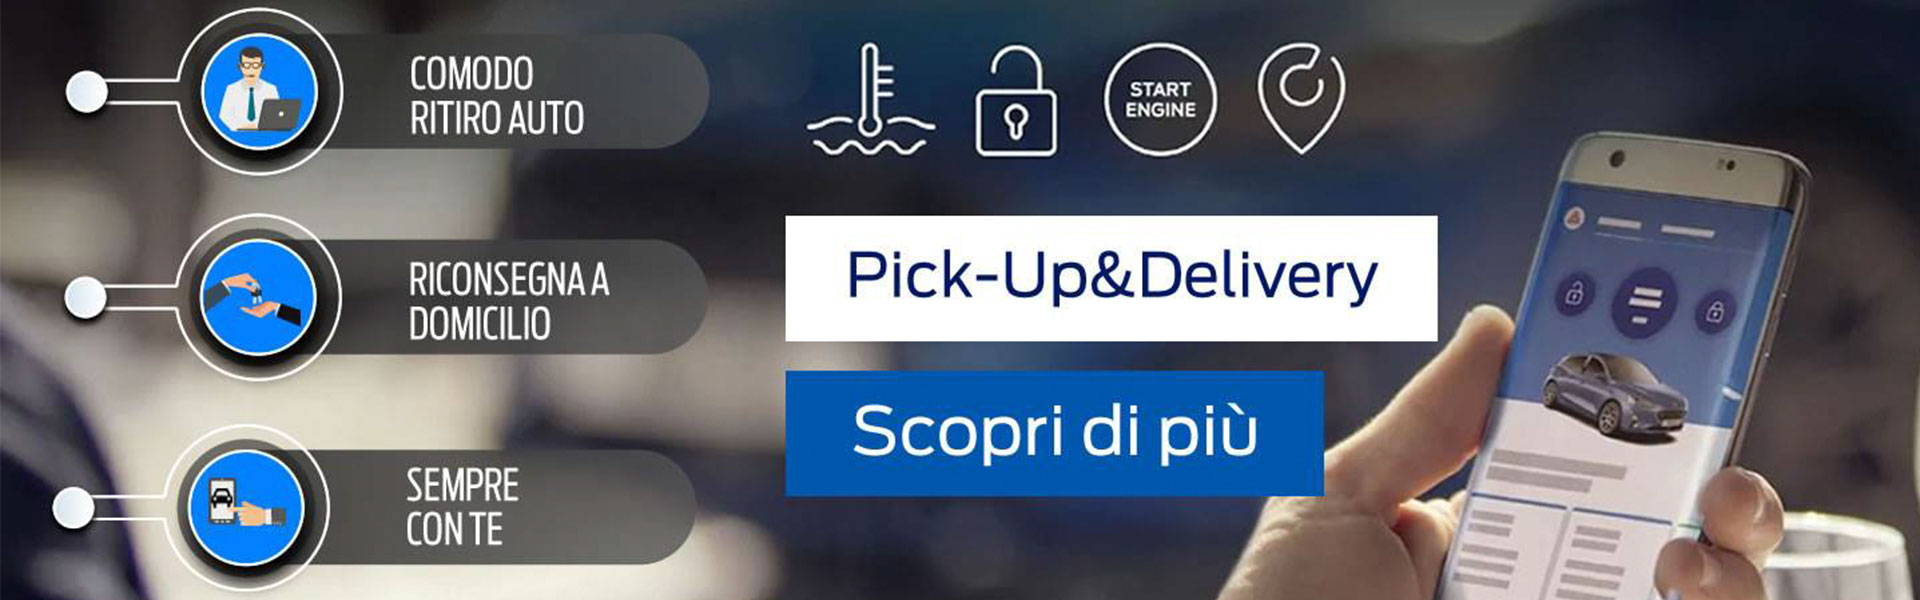 Pick Updelivery 1920X600